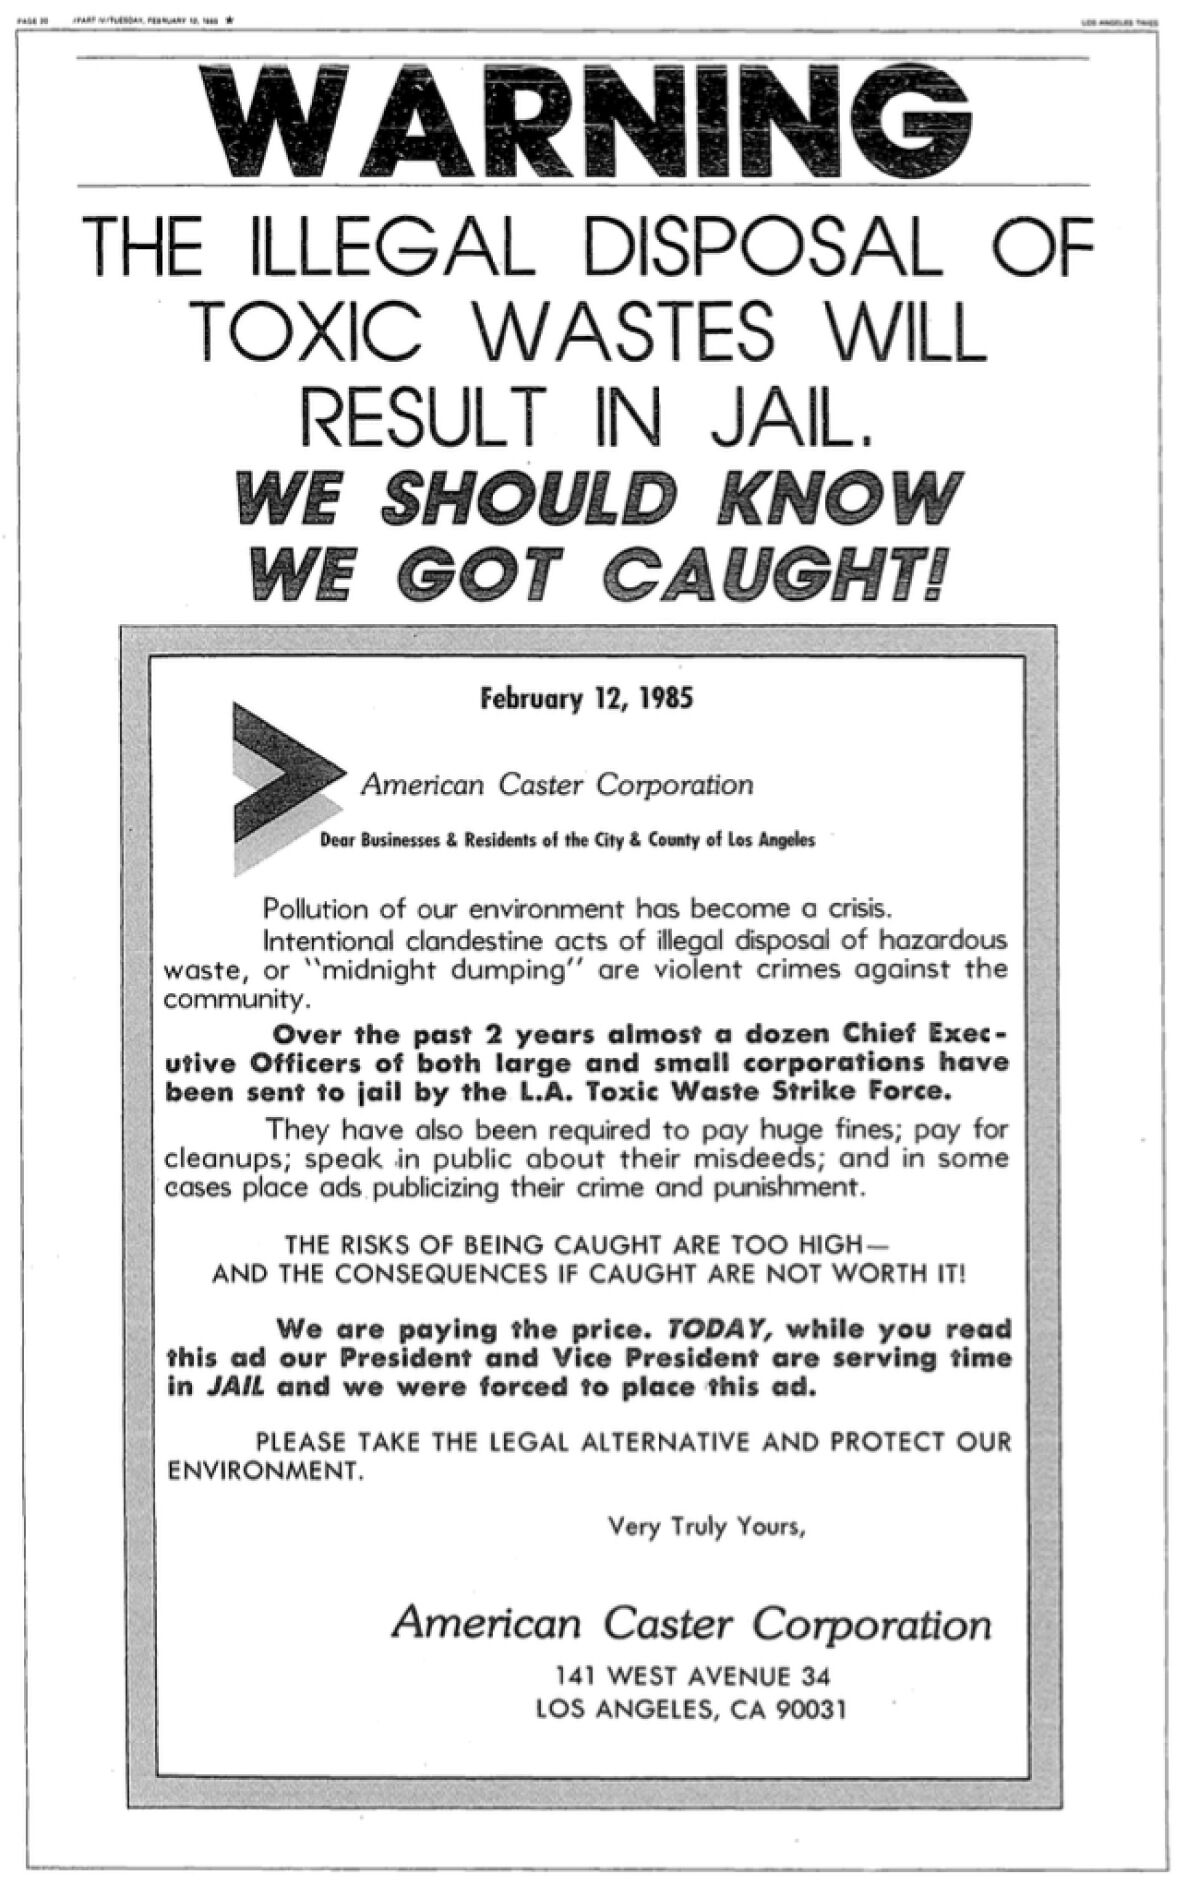 "The illegal disposal of toxic wastes will result in jail. We should know we got caught!" reads a 1985 ad.